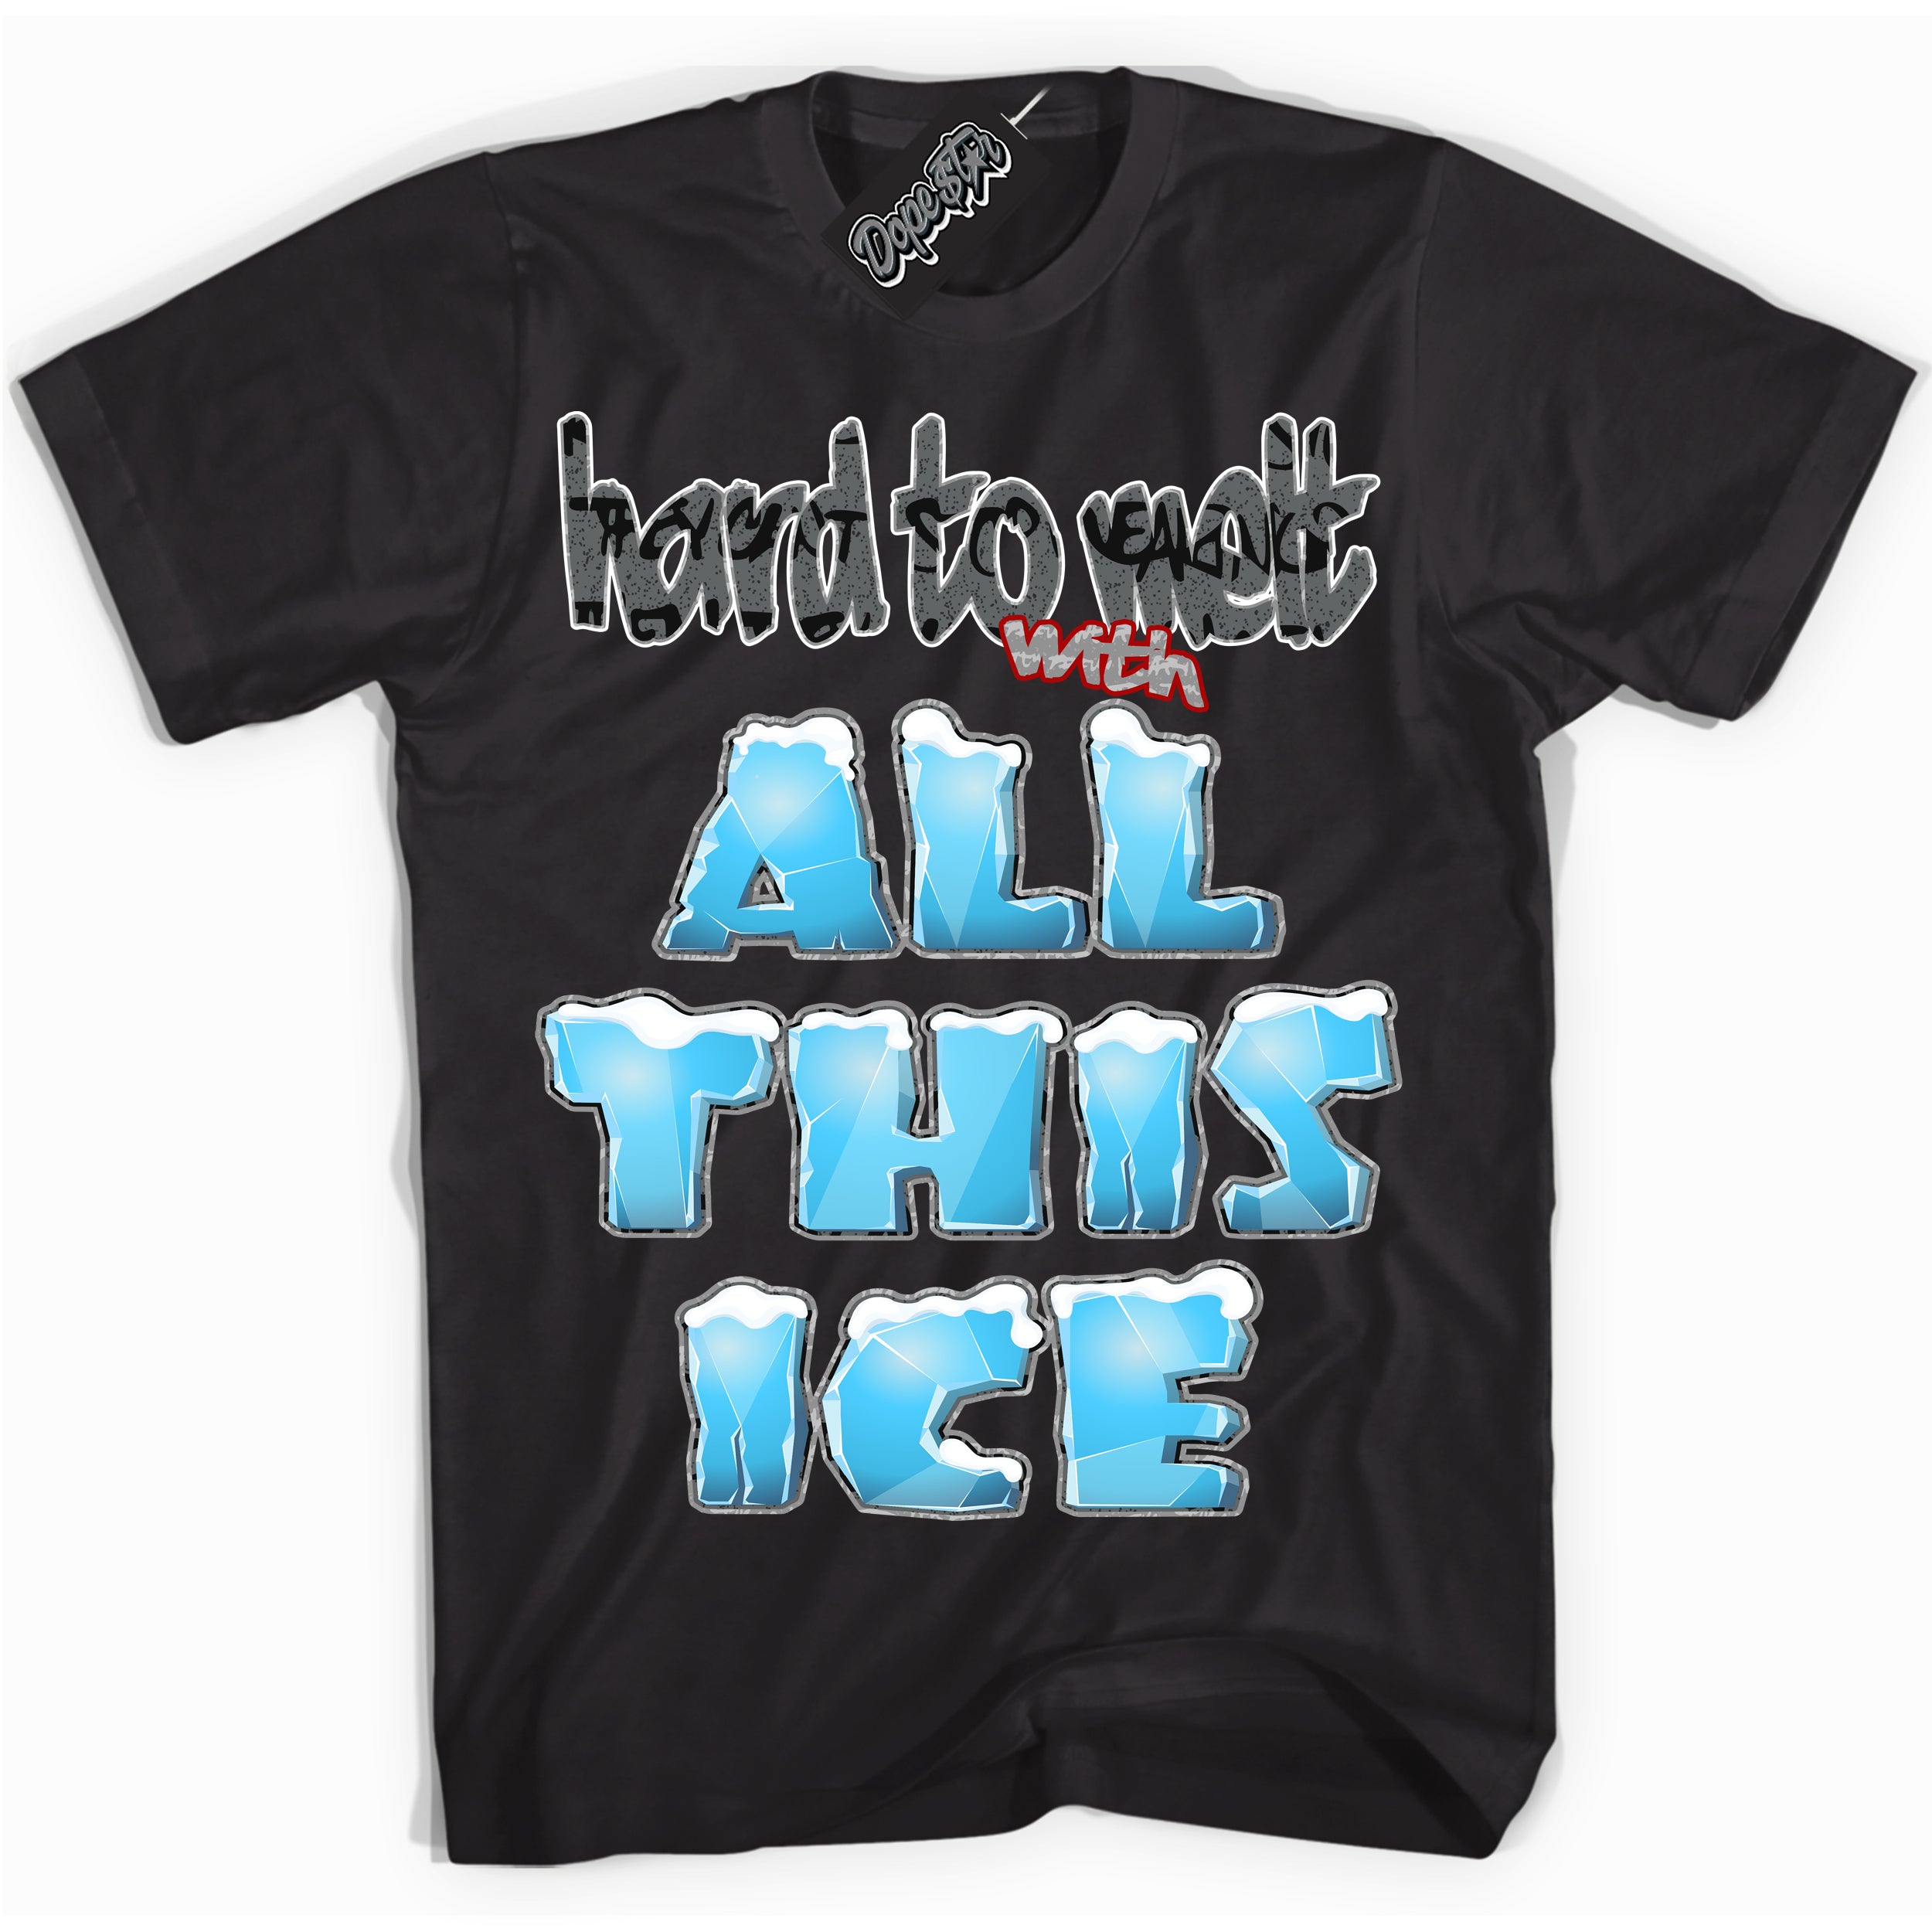 Cool Black Shirt with “ All This Ice ” design that perfectly matches Rebellionaire 1s Sneakers.